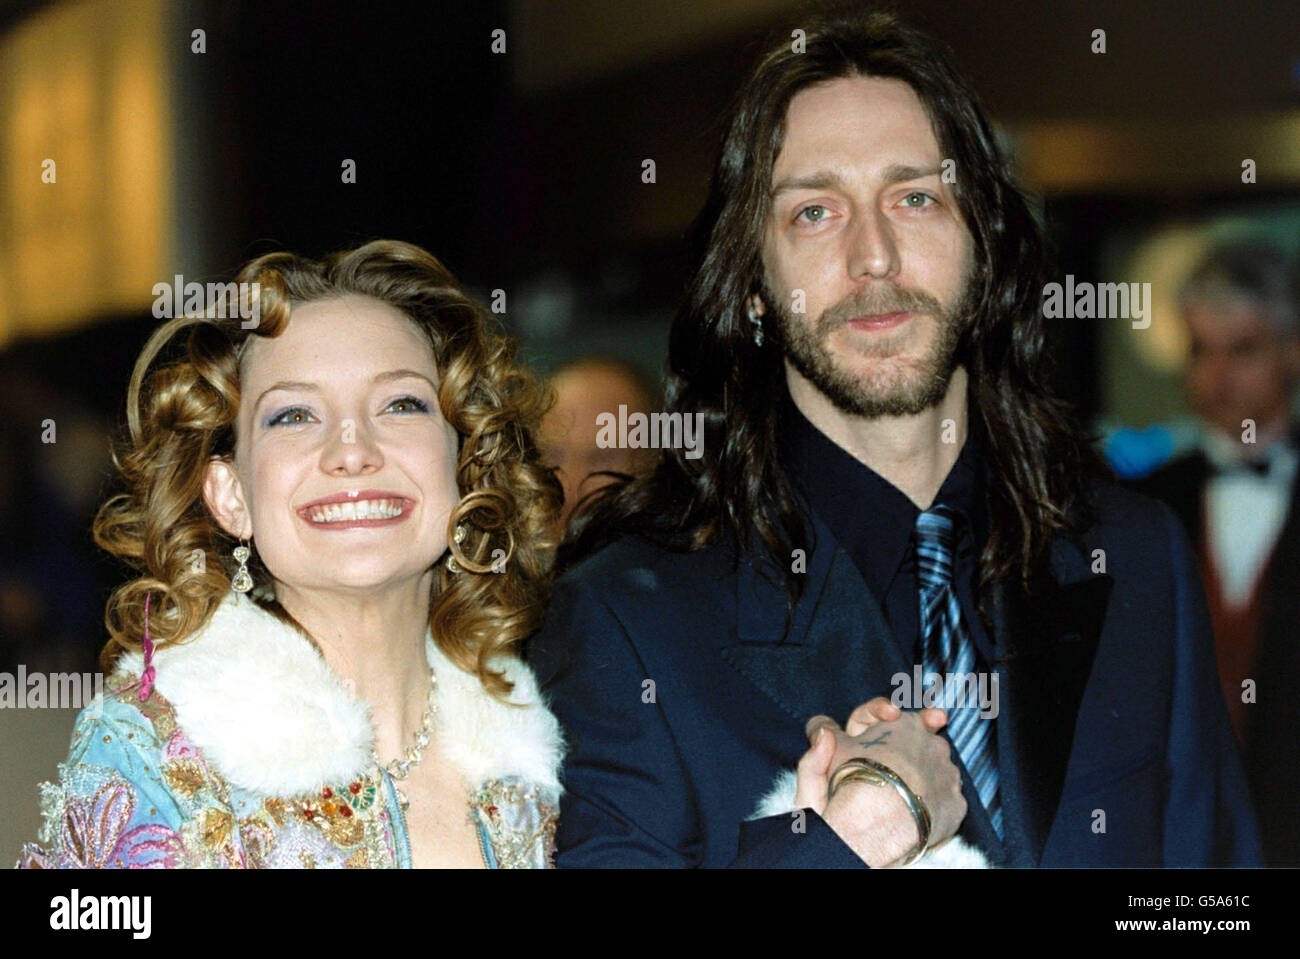 Goldie Hawn's daughter, actress Kate Hudson with her husband, singer Chris Robinson of rock group the Black Crowes, during The Orange British Academy Film Awards at the Odeon in London's Leicester Square. The ceremony has been brought forward several weeks from previous years to give it a more prominent position in the film calendar. Stock Photo